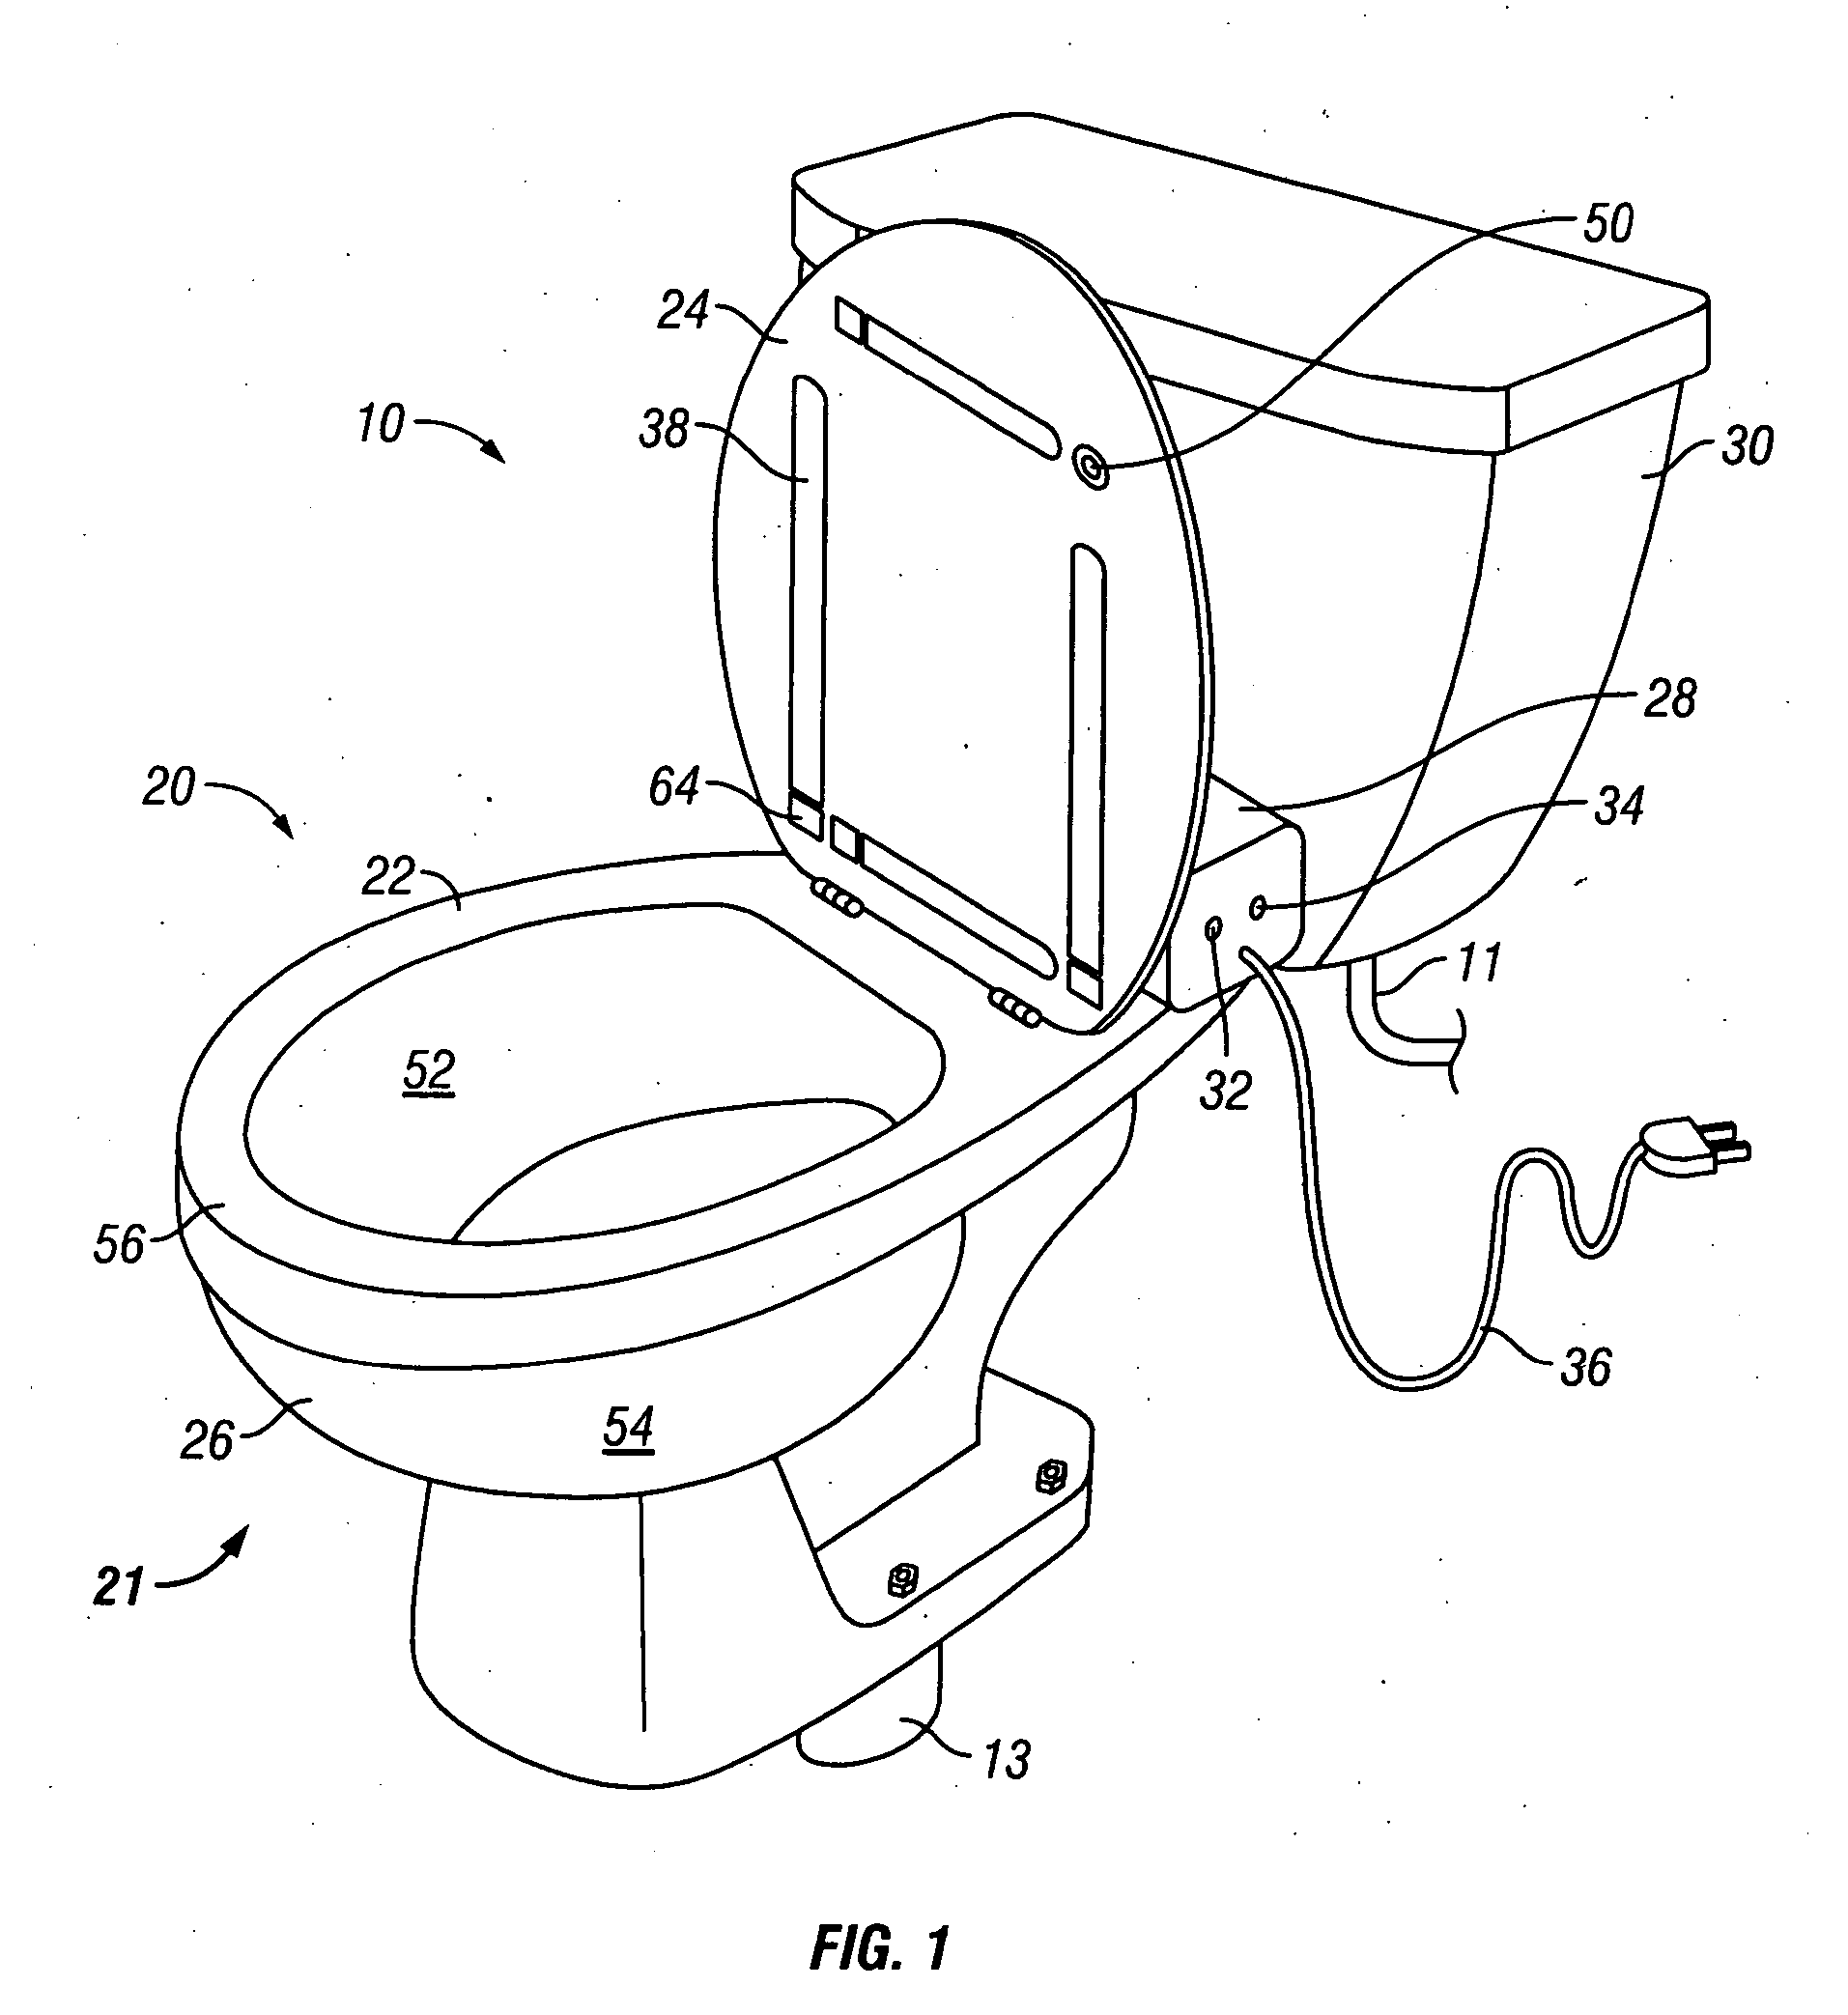 Toilet accessory with sterilization elements